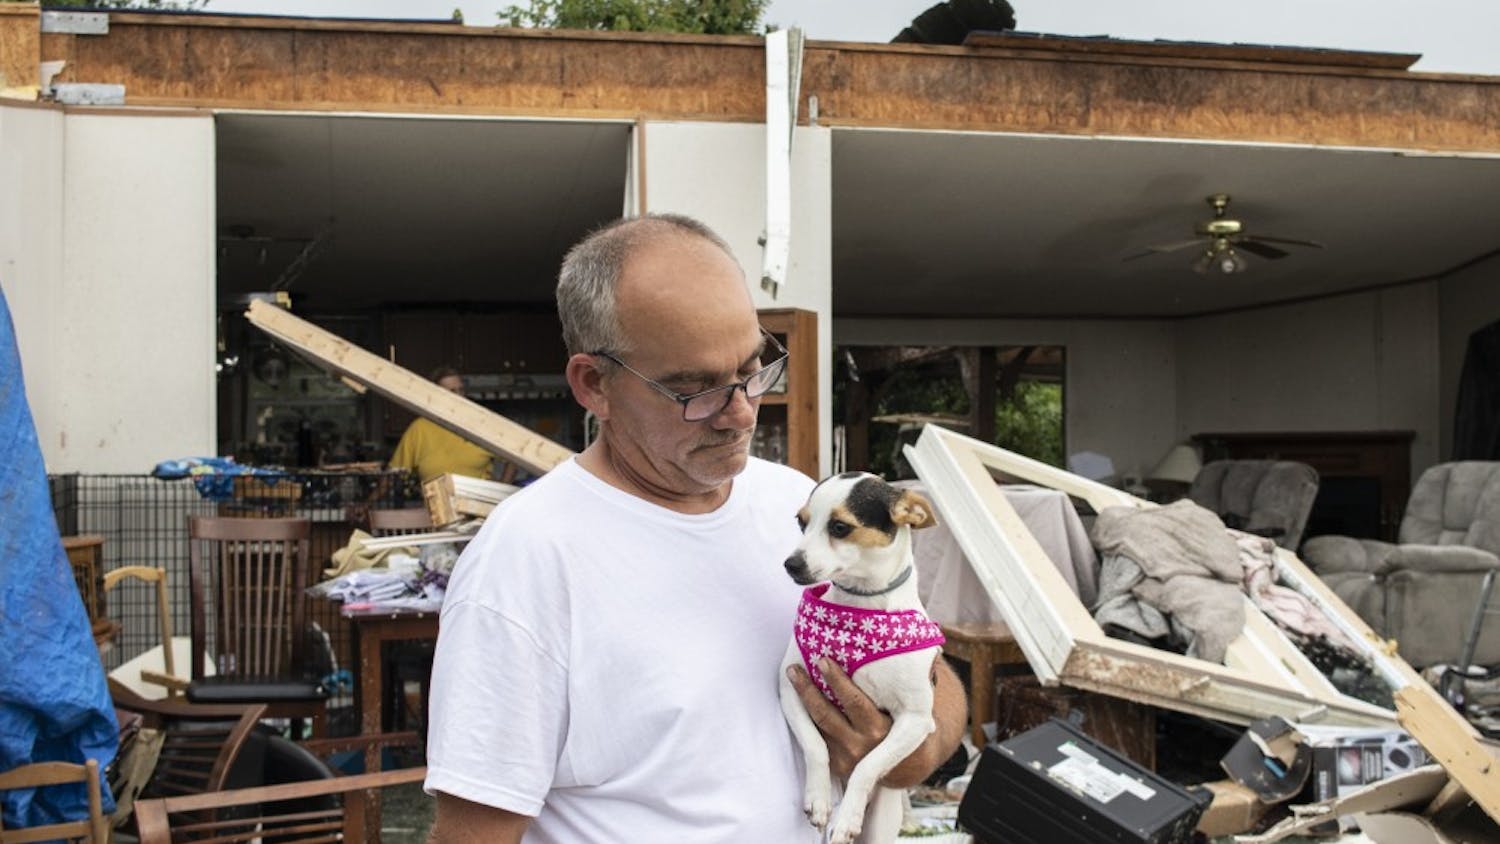 GALLERY: Monroe County residents struggle with loss in tornado's aftermath